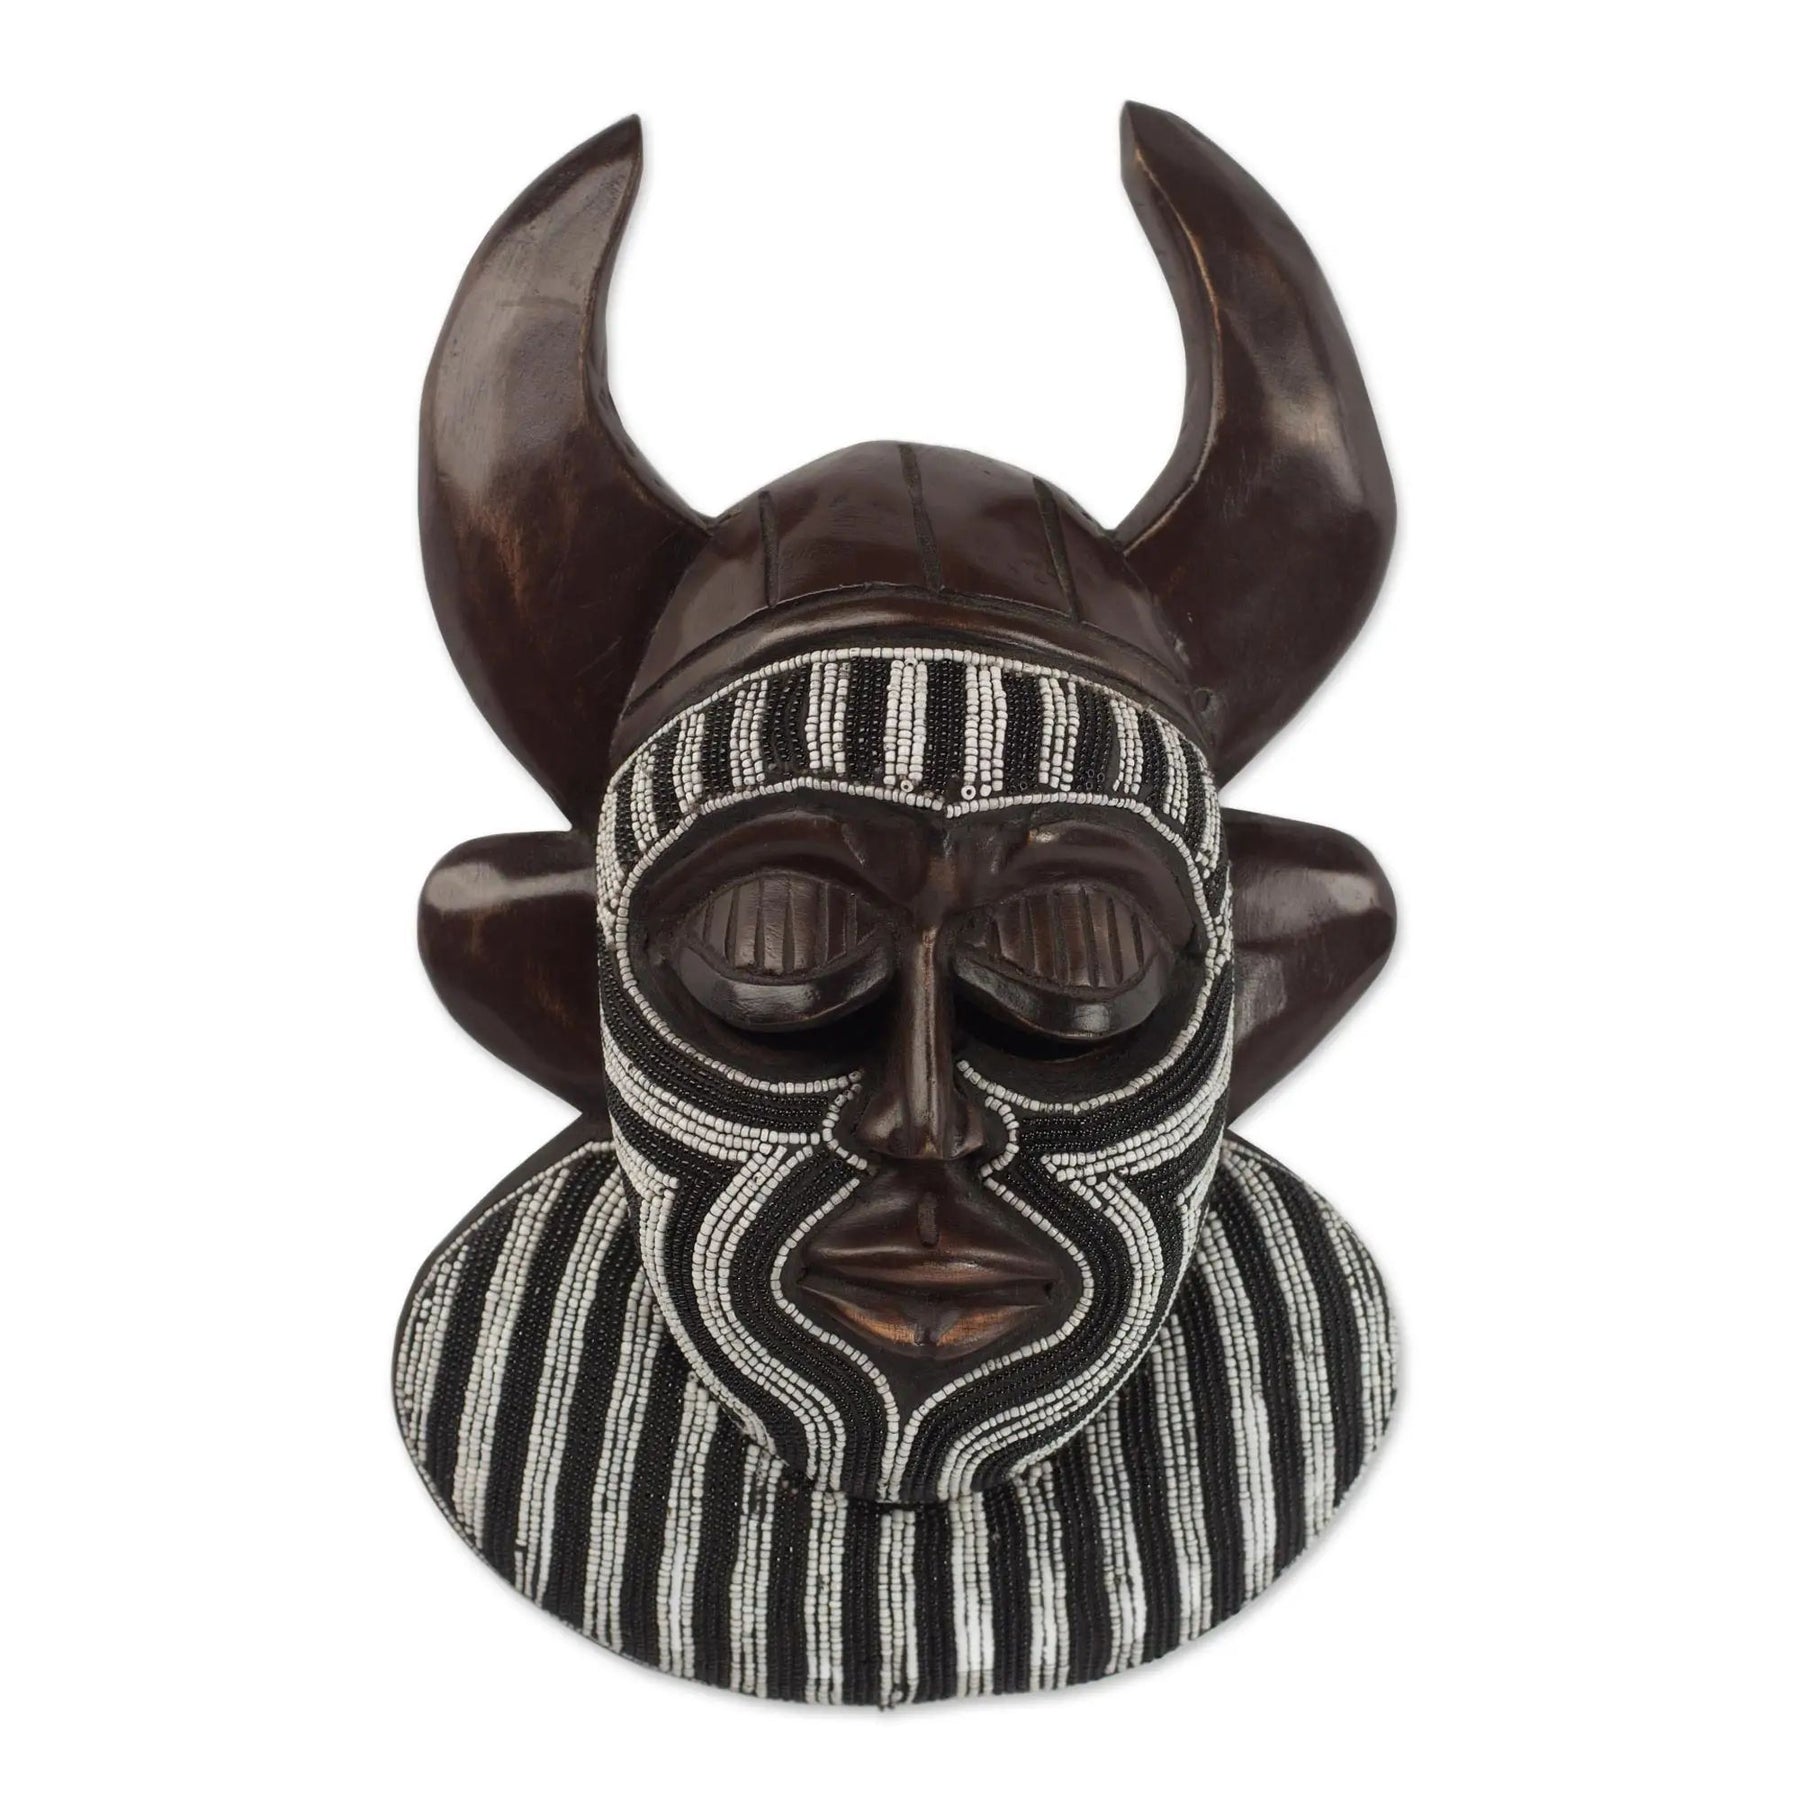 1 of 3: Authentic African Hand Made Kafo Horn Mask of Power by Awudu Saaed